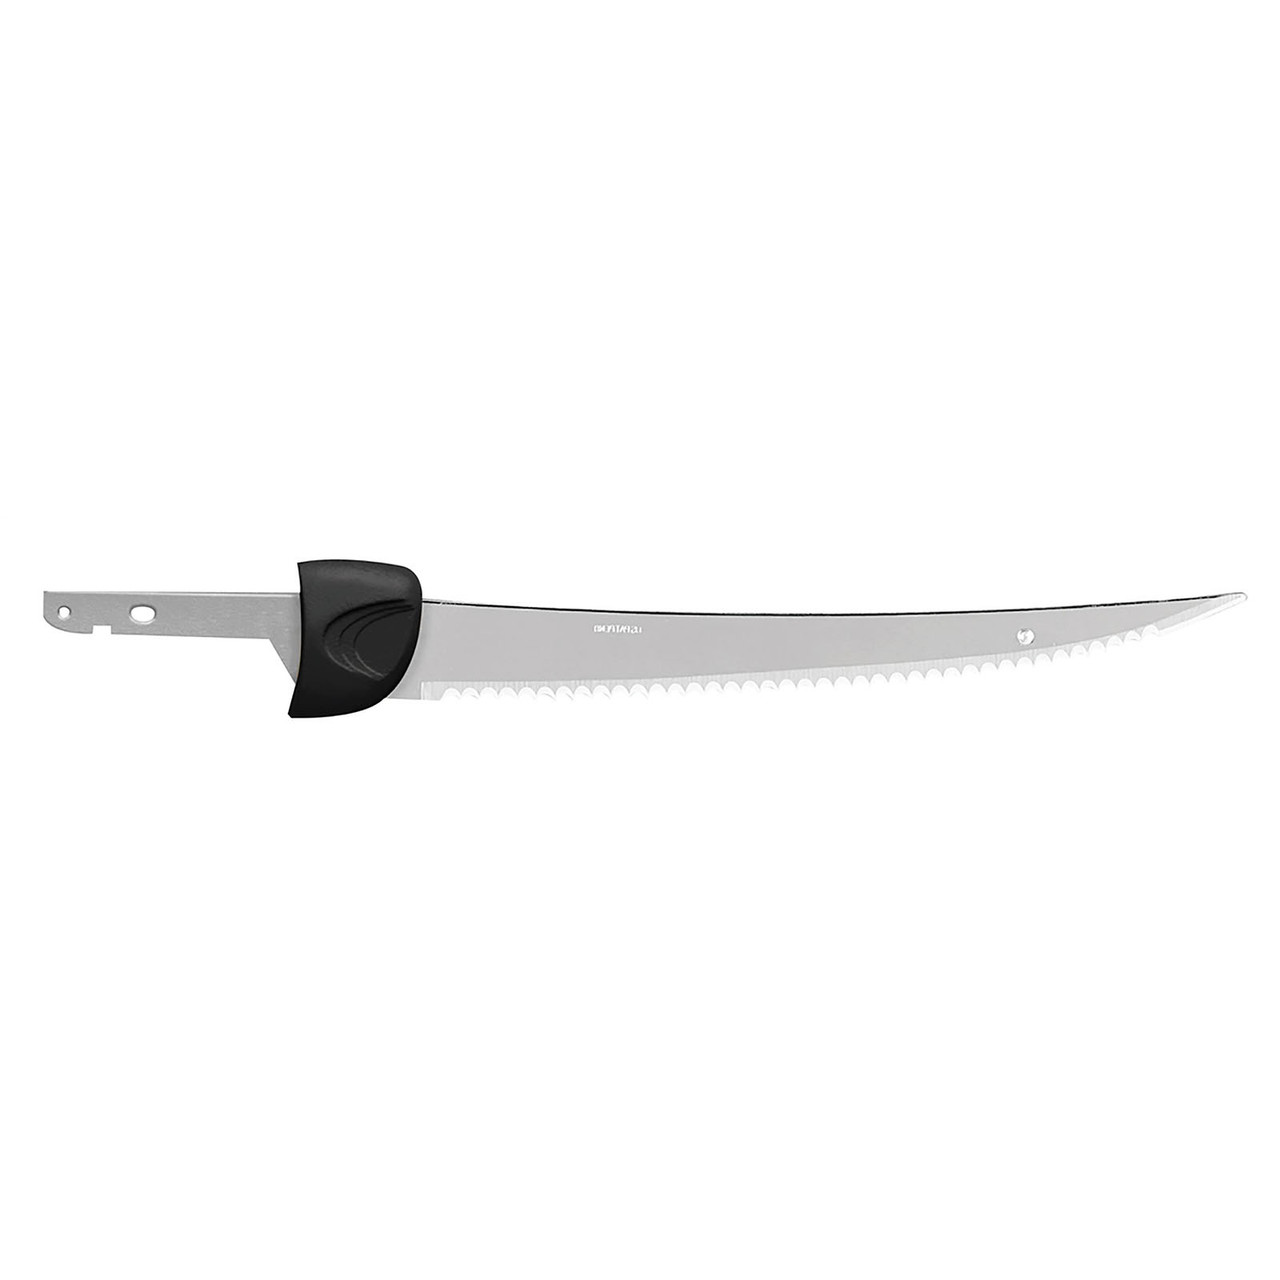 American Angler 8 in. Curved Tip Electric Fillet Knife Replacement Blade